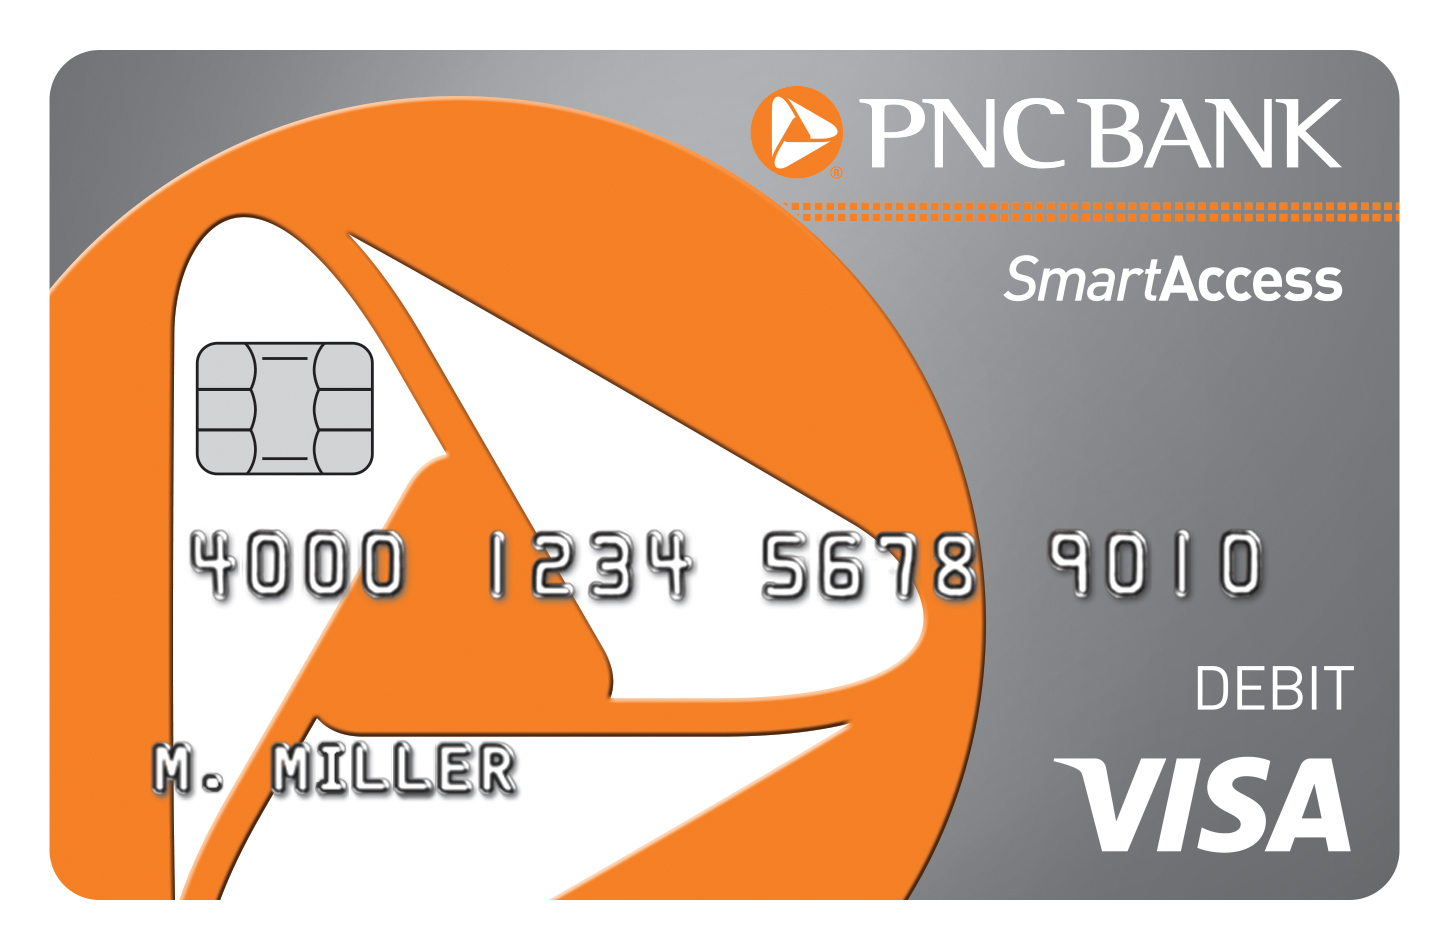 pnc credit card application declined